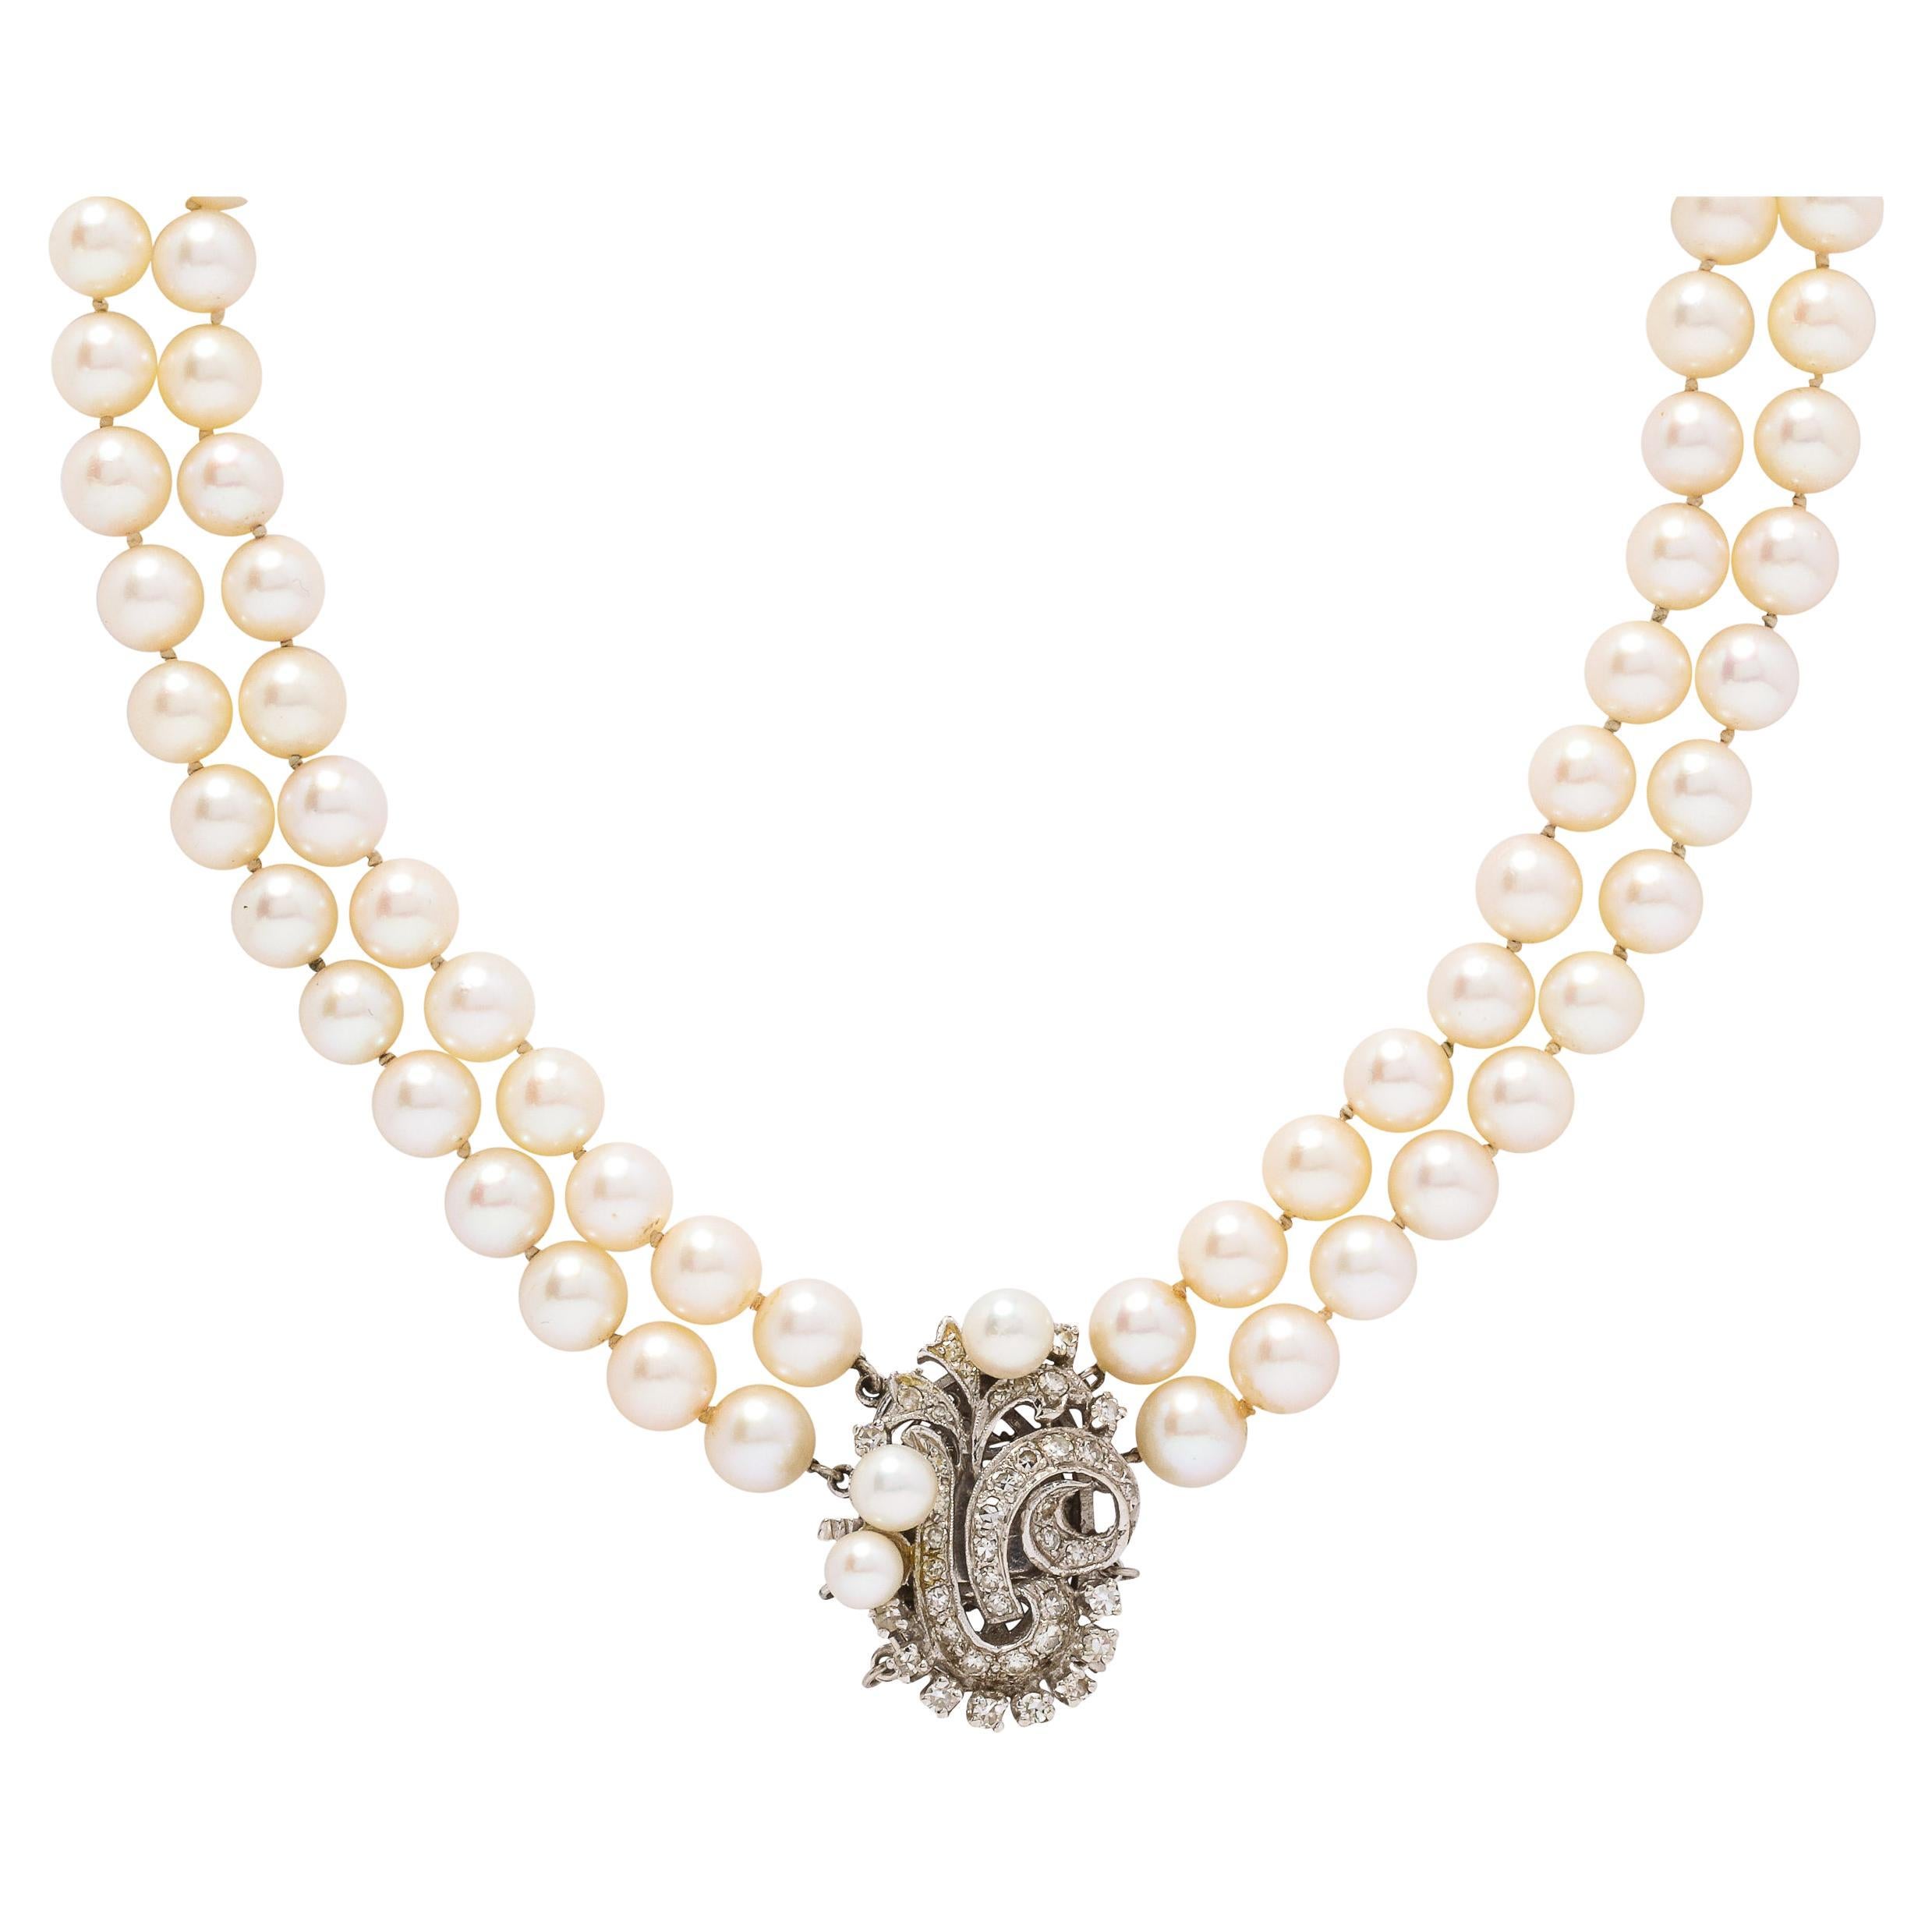 Art Deco double strand pearl necklace with a gold, diamond and pearl clasp. Individually knotted pearls measuring 7.5 mm each. With a 14k white gold clasp inlaid throughout with diamonds and accented further with 3 smaller pearls.Marked 14k. !5